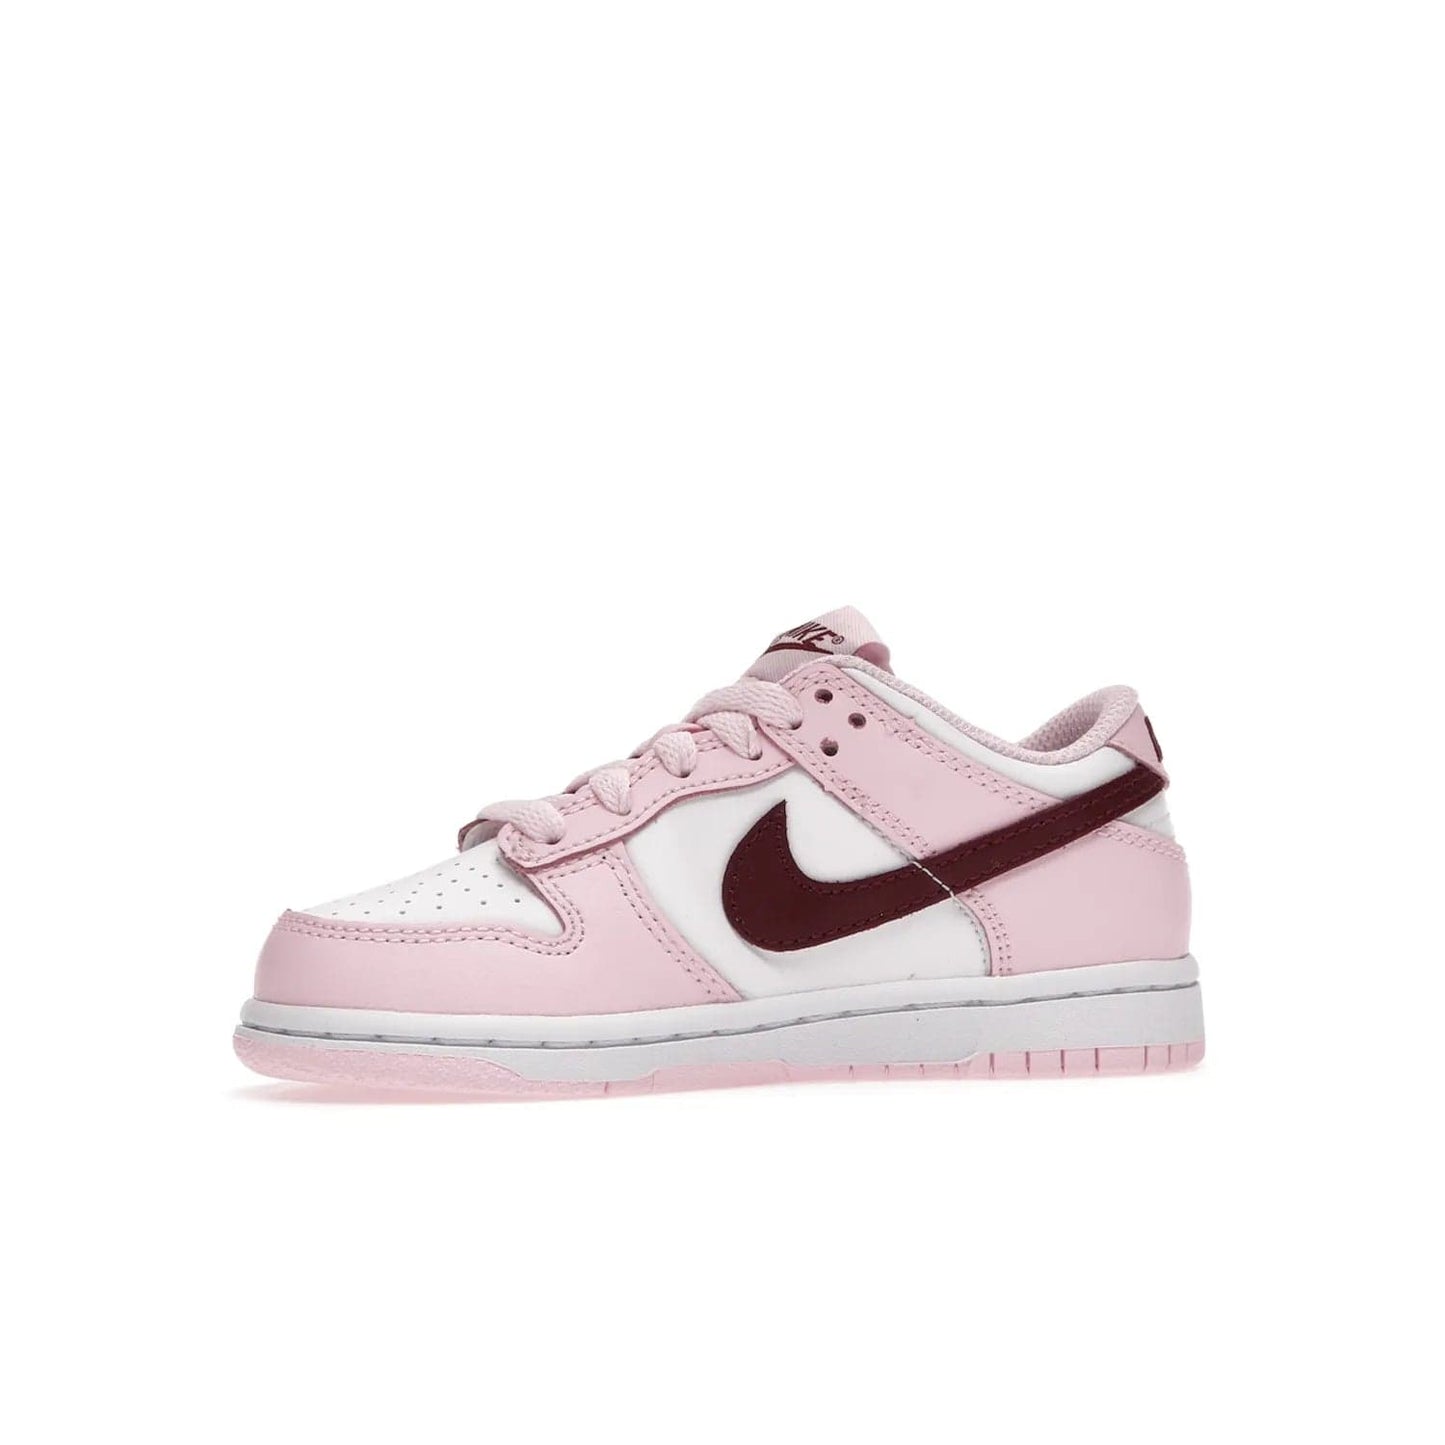 Nike Dunk Low Pink Red White (PS) - Image 17 - Only at www.BallersClubKickz.com - Introducing the Nike Dunk Low Pink Red White (PS), the perfect addition to your sneaker collection. A classic silhouette with modern vibrant colors, including a pink upper with red and white accents and a white midsole. Comfort and durability, perfect for any outfit. Limited edition, available June 22nd.